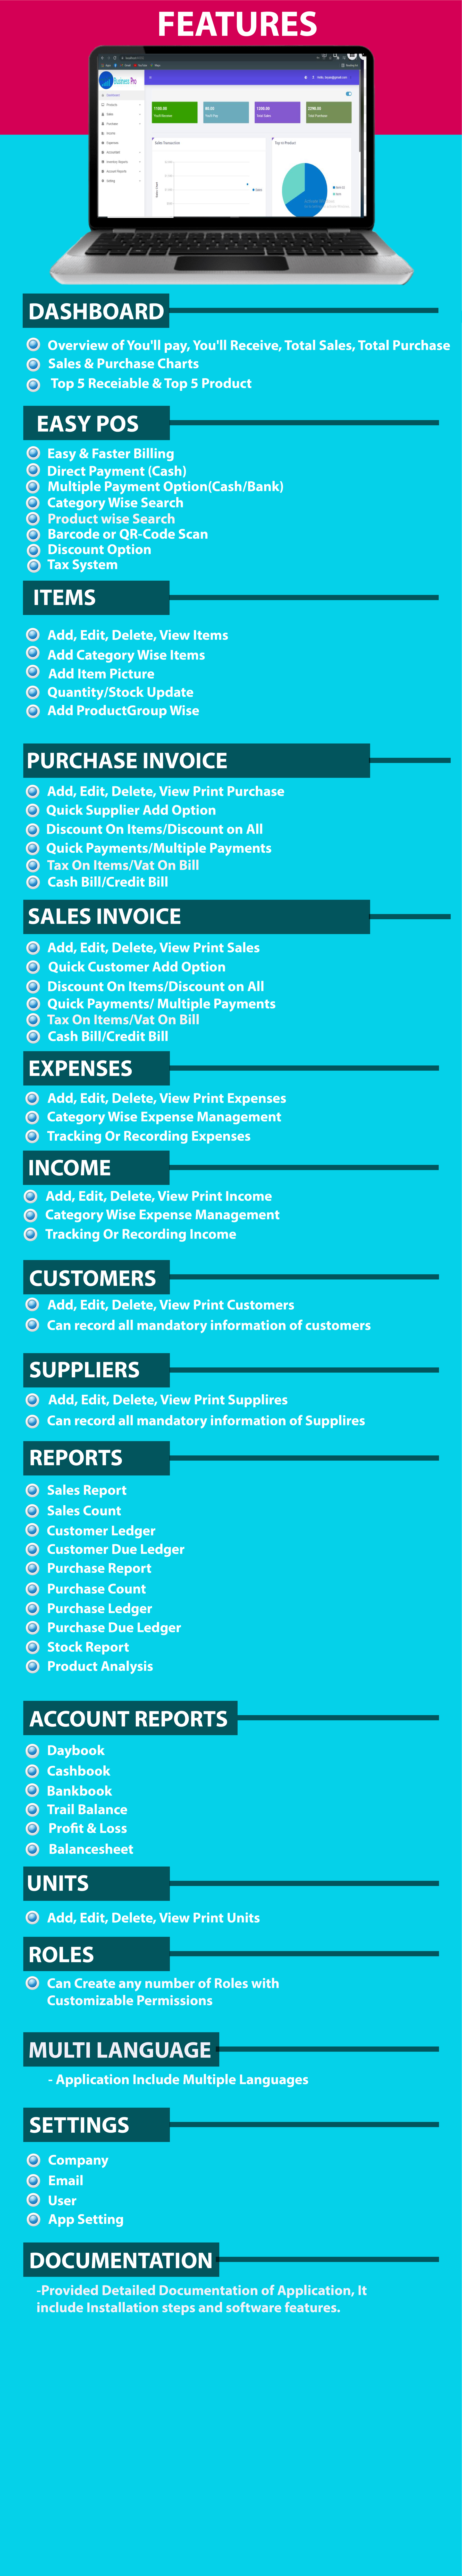 Business Pro - Accounting & Inventory / Product / Shop / Company Management - 1